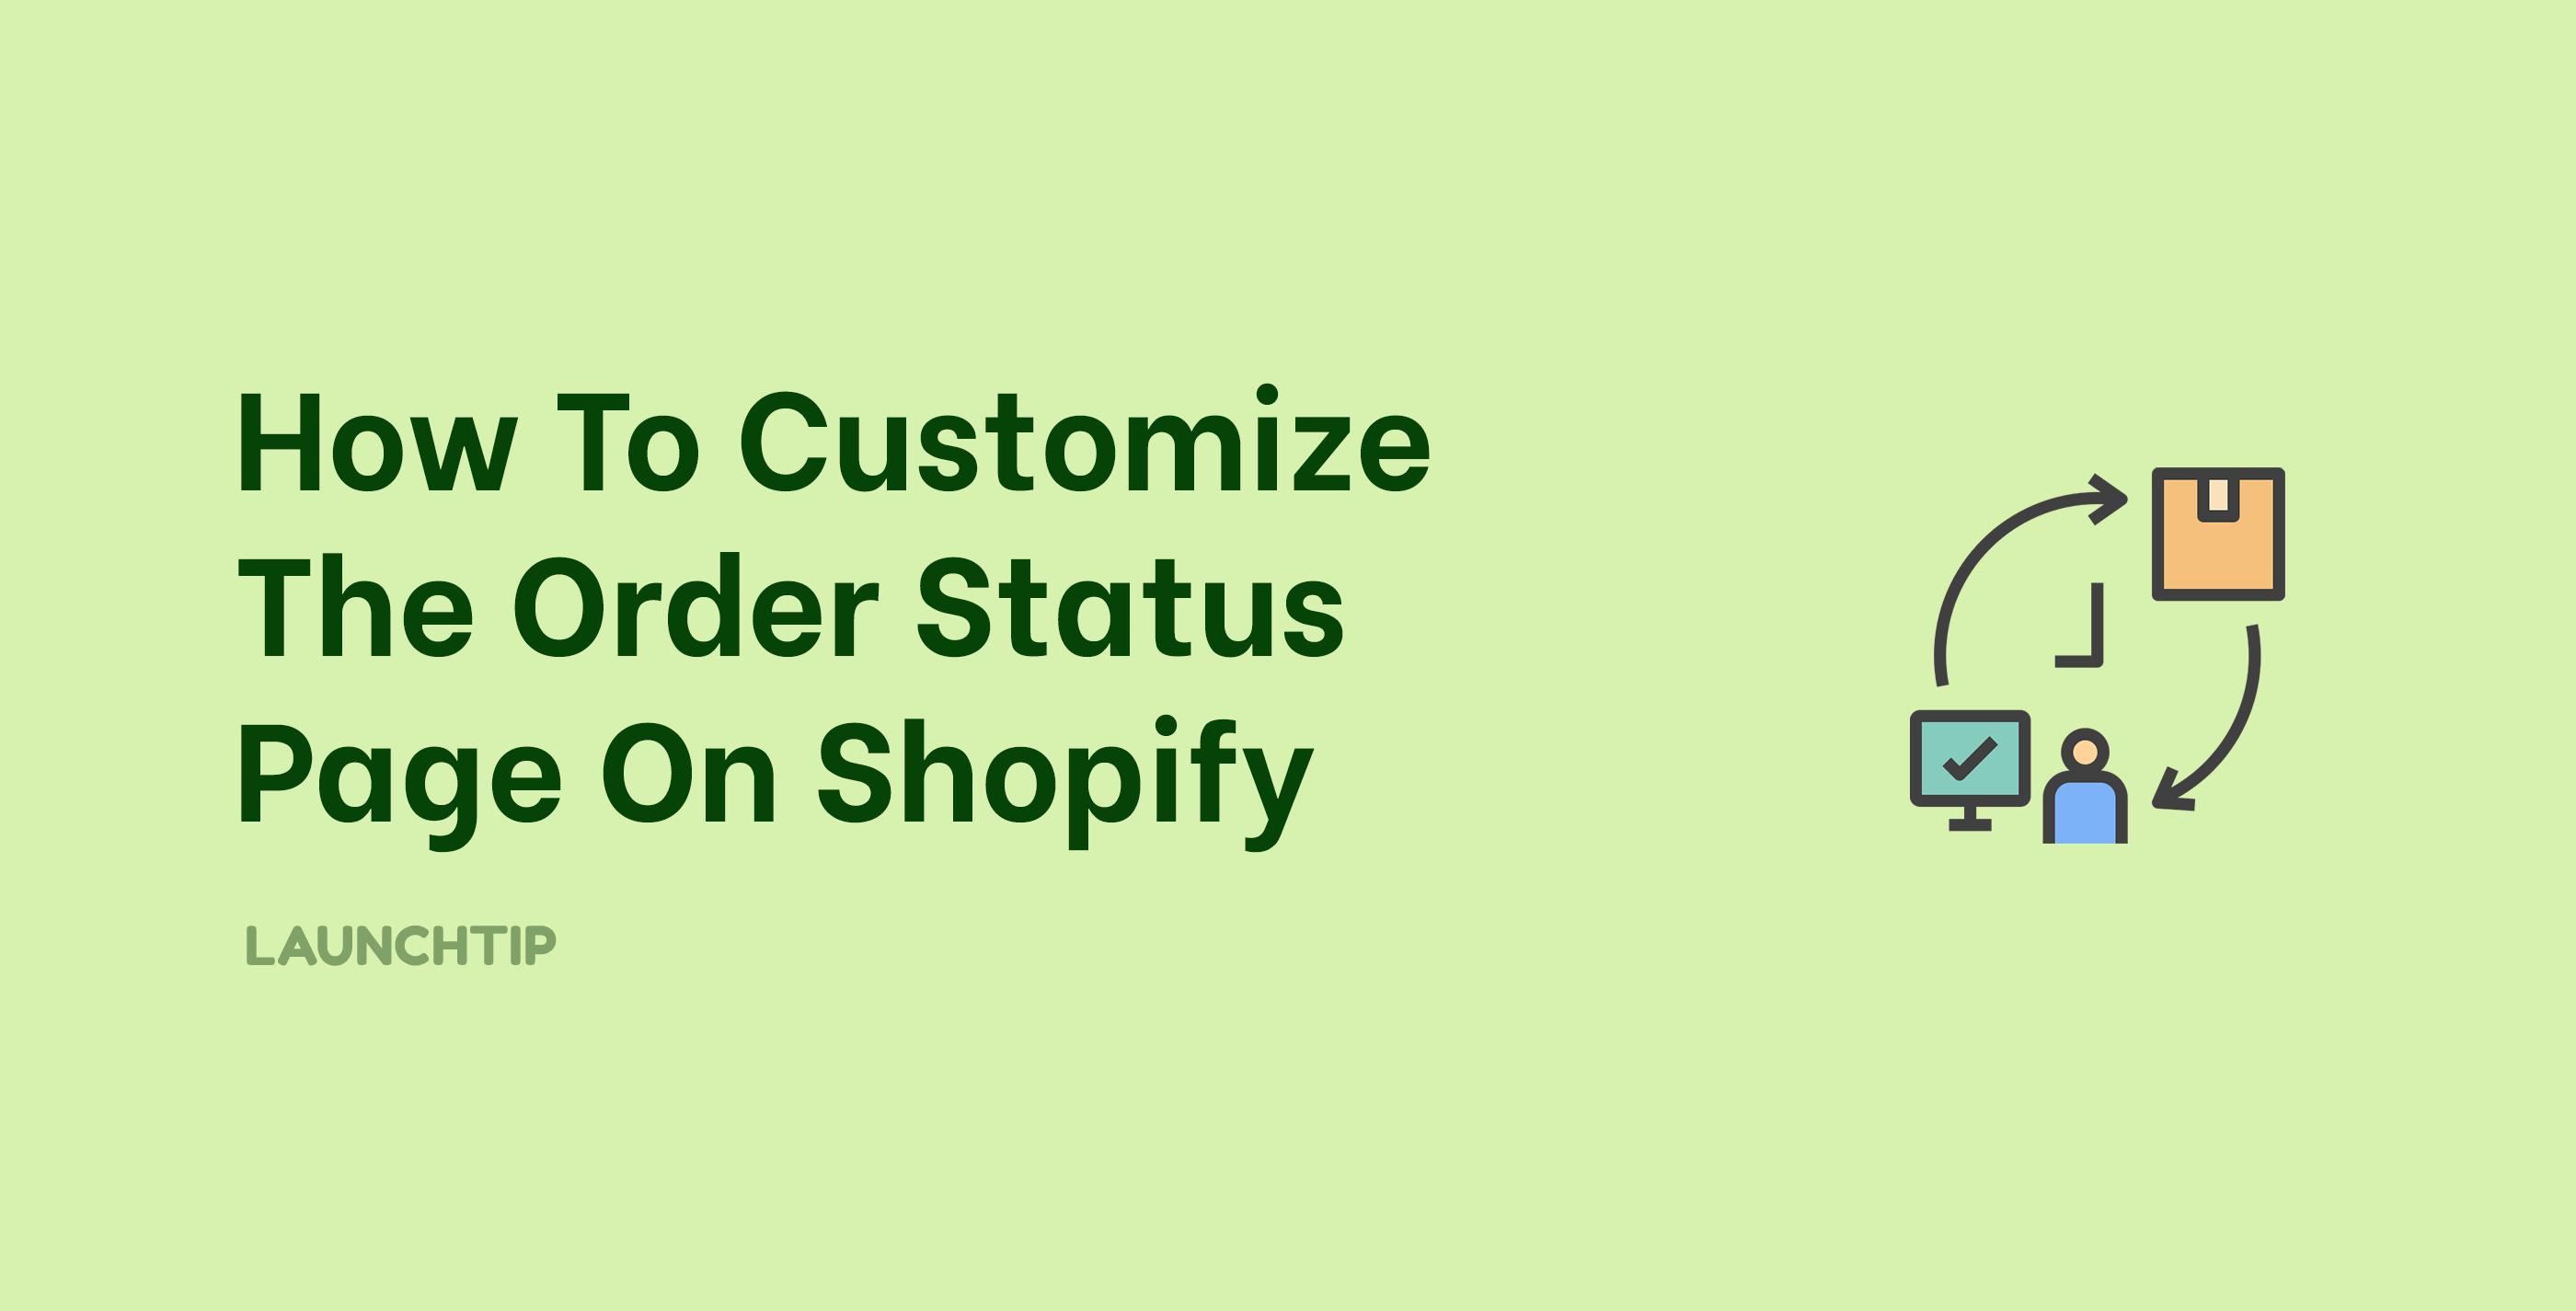 How To Customize The Order Status Page On Shopify